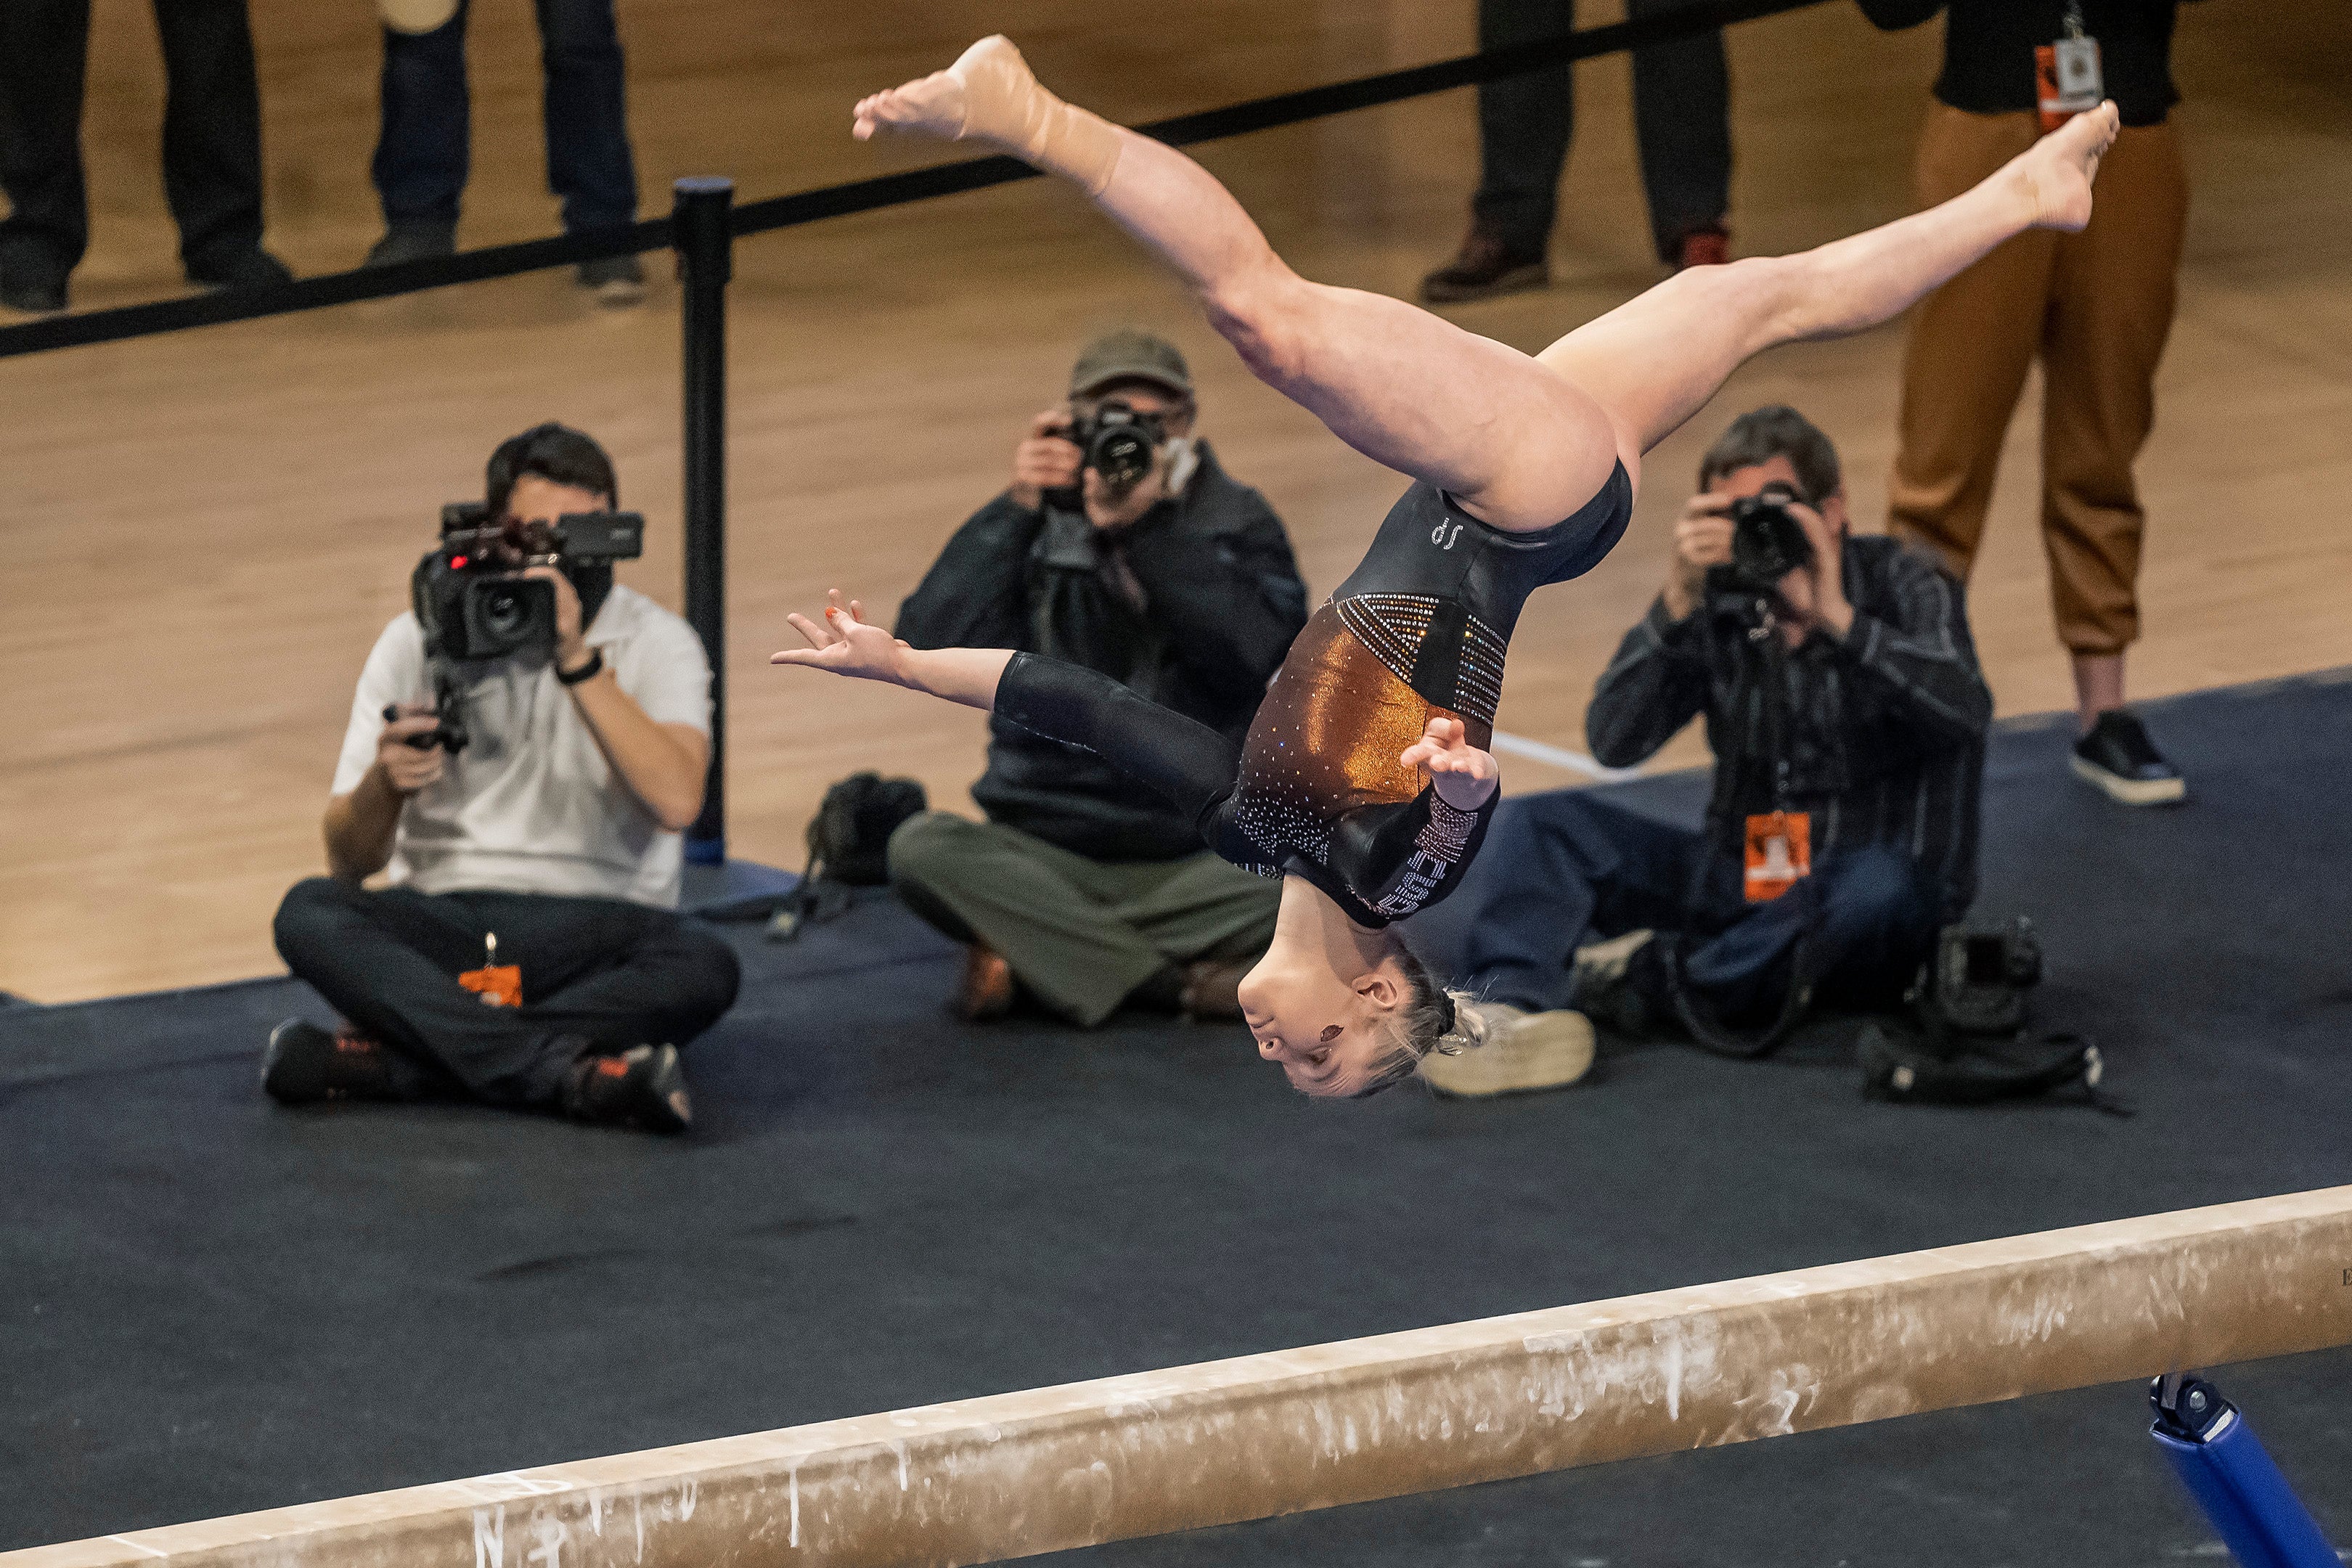 Jade Carey flipping upside down above the balance beam with cameramen filming her in the background.